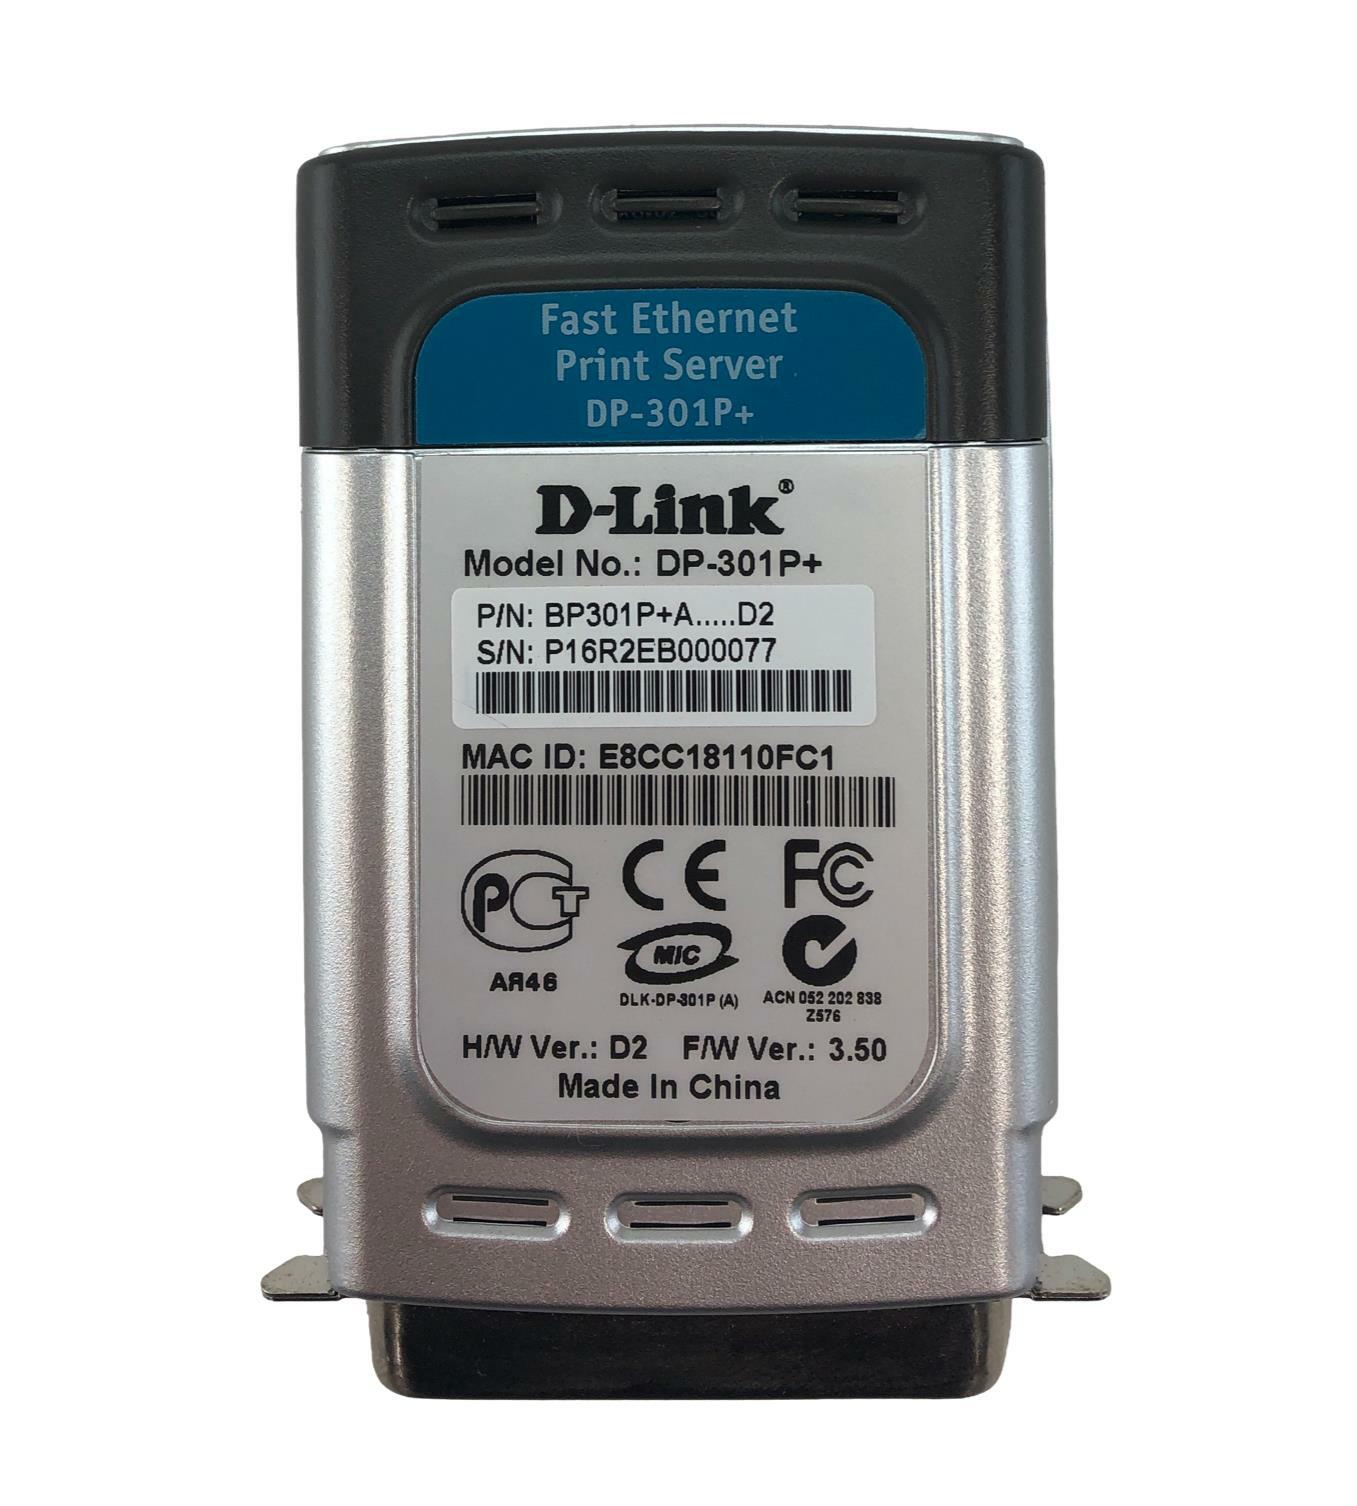 D-Link PD-301P+ Fast Ethernet Parallel Port Print Server w/ AC Adapter